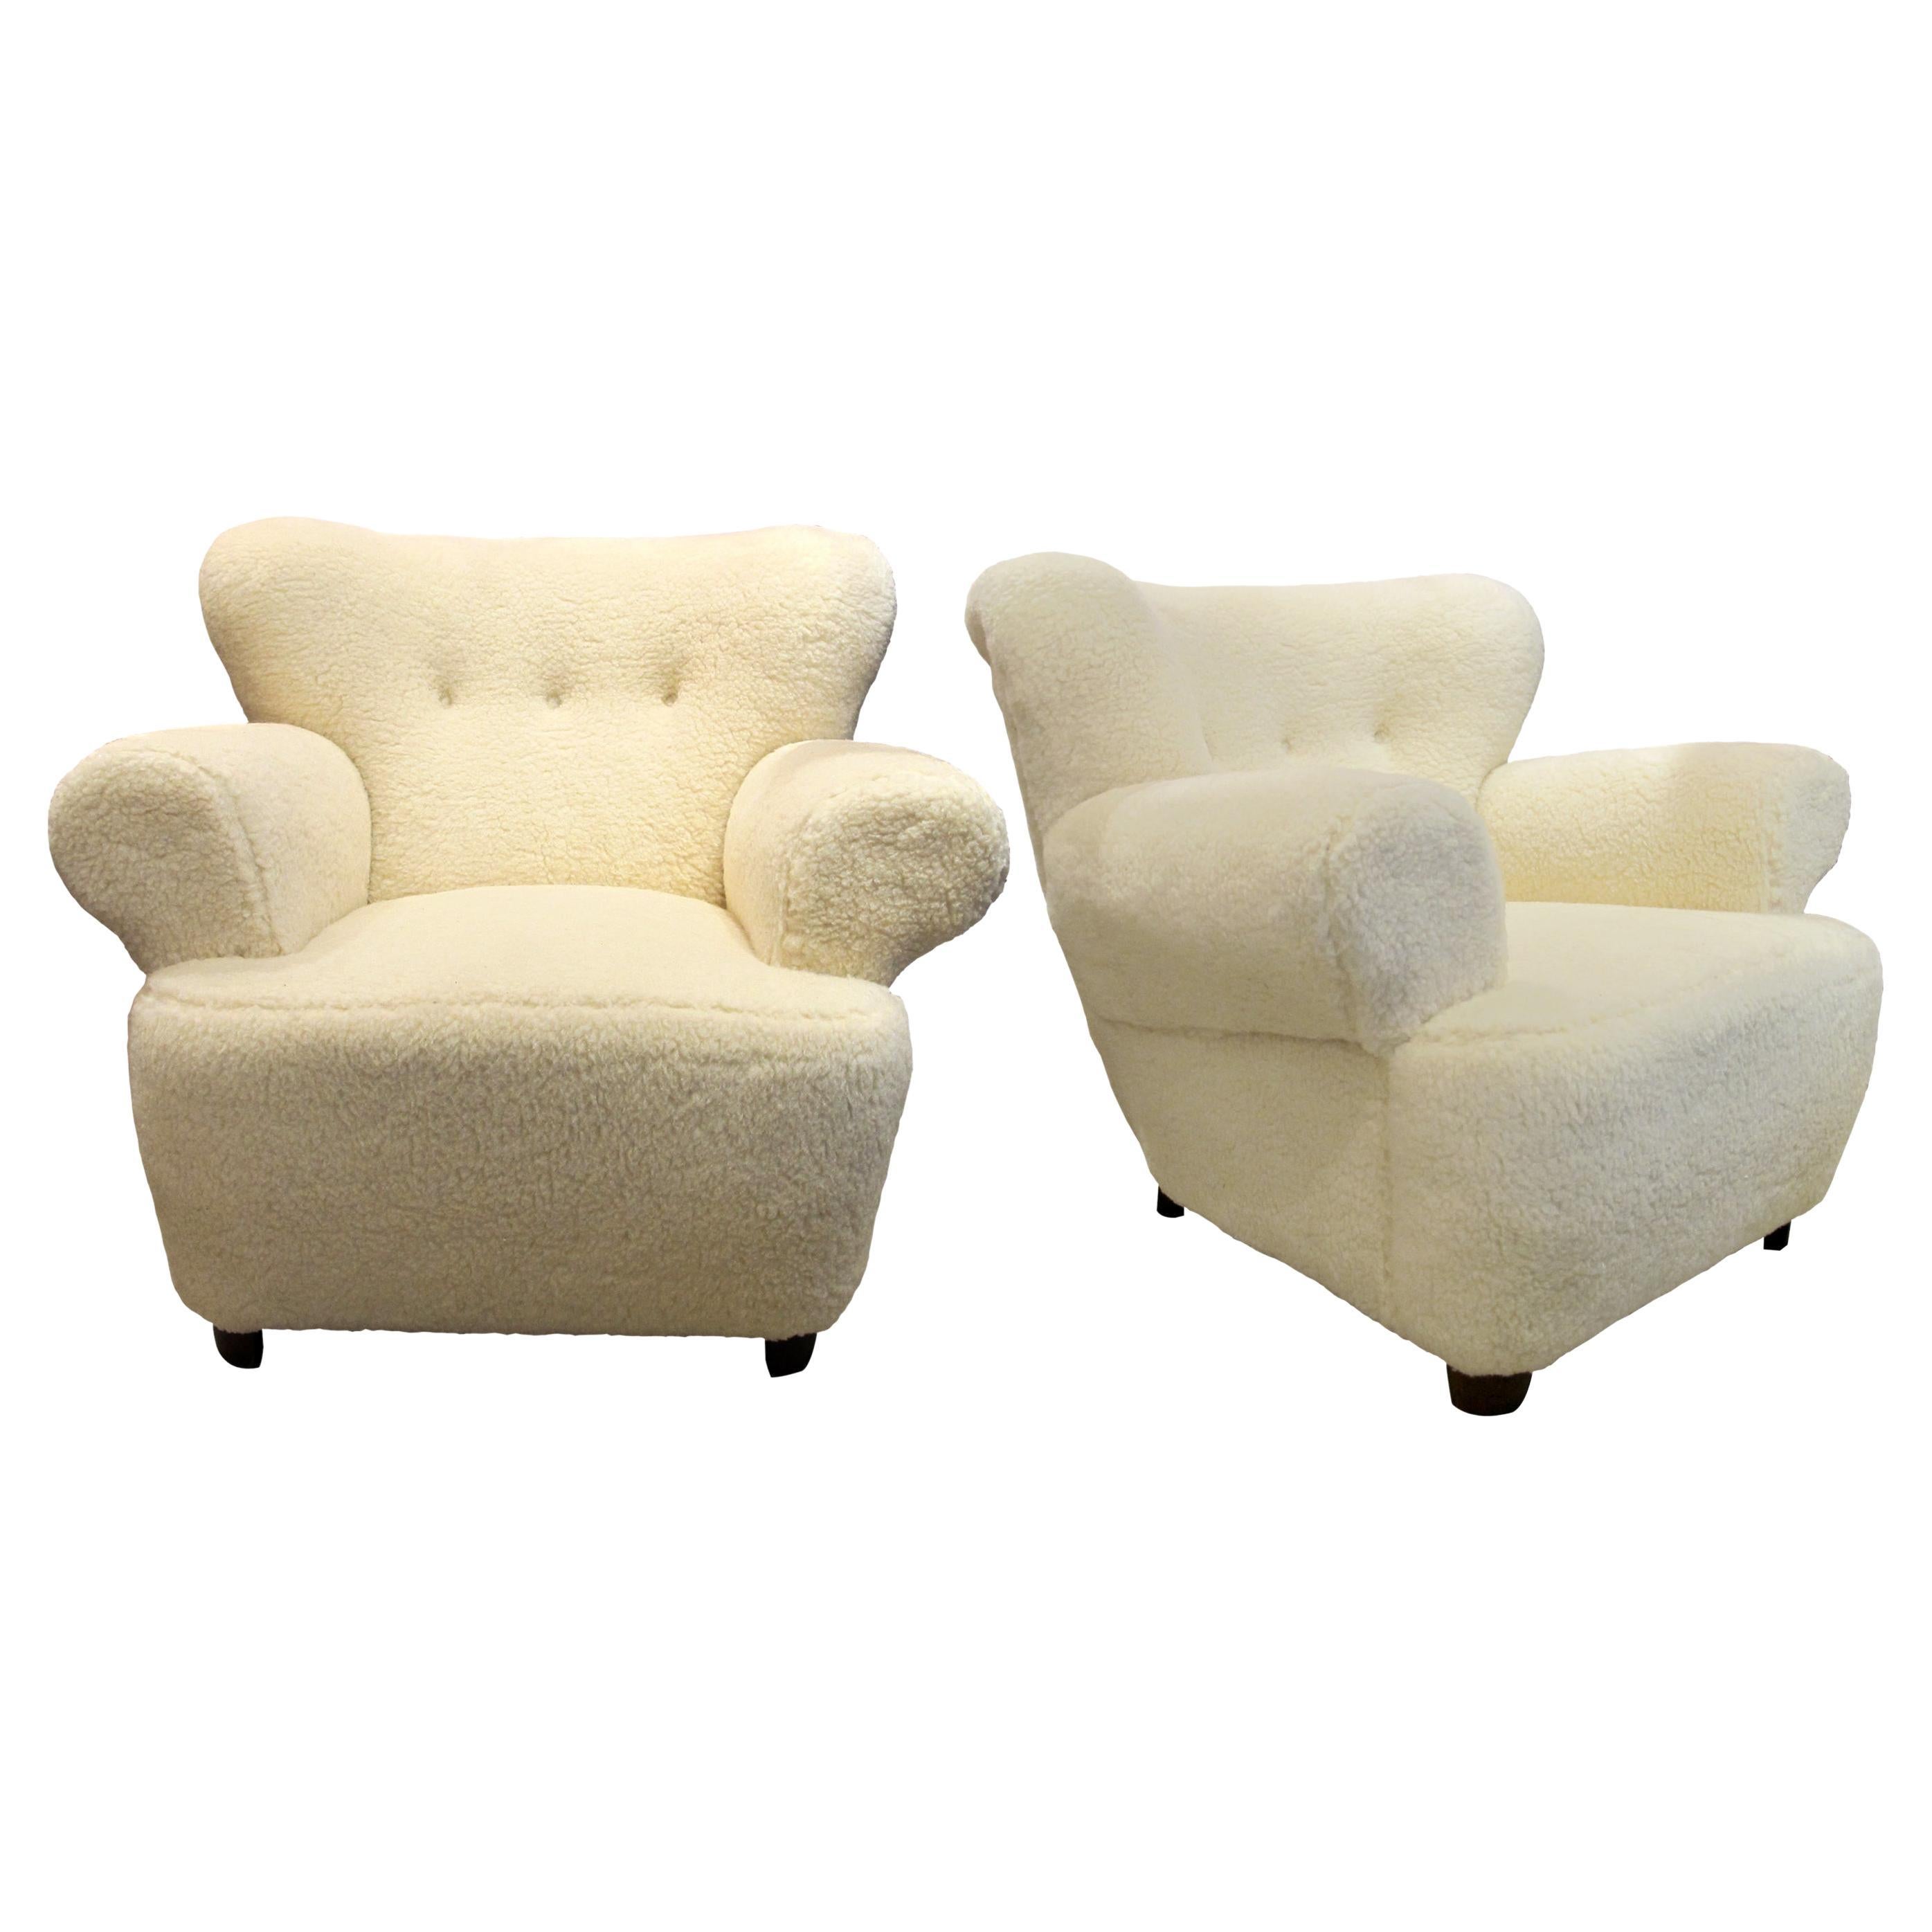 Pair of 1950s Large Swedish Armchairs Newly Upholstered in a Lamb Mix Fabric